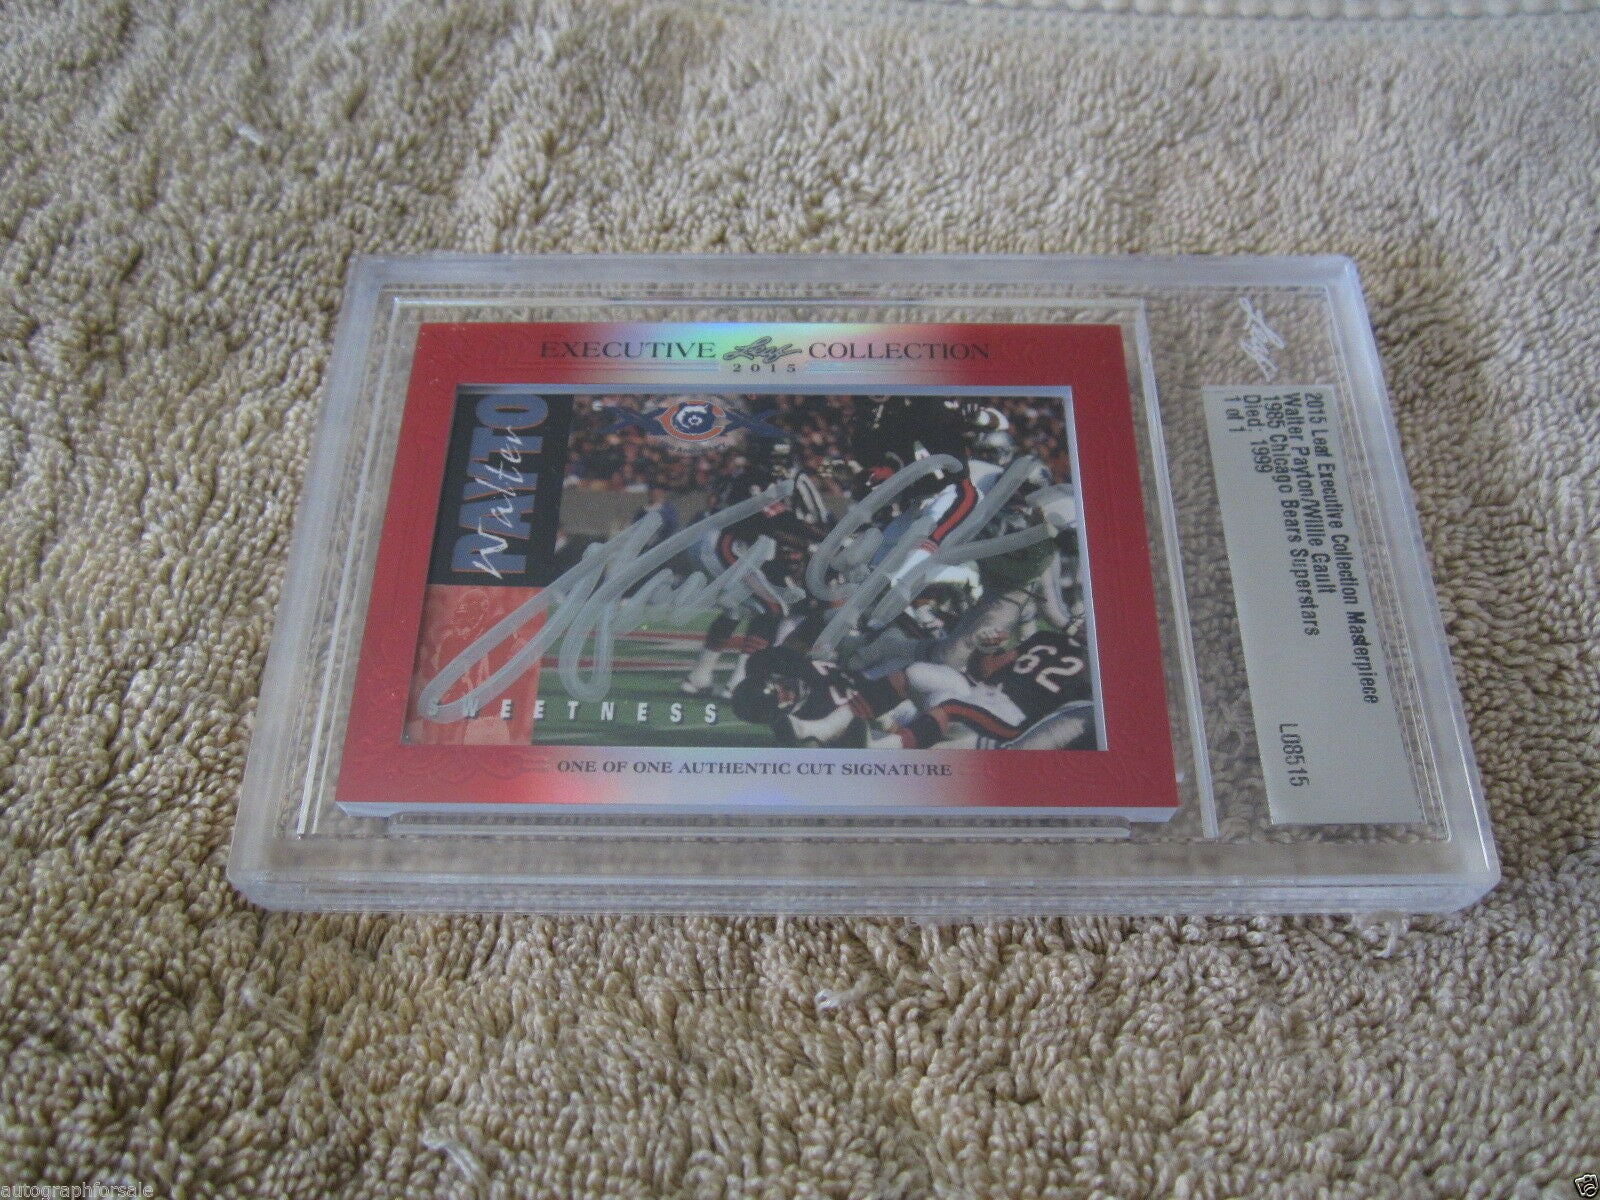 Walter Payton and Willie Gault 2015 Leaf Masterpiece Cut Signature certified autograph card 1/1 JSA